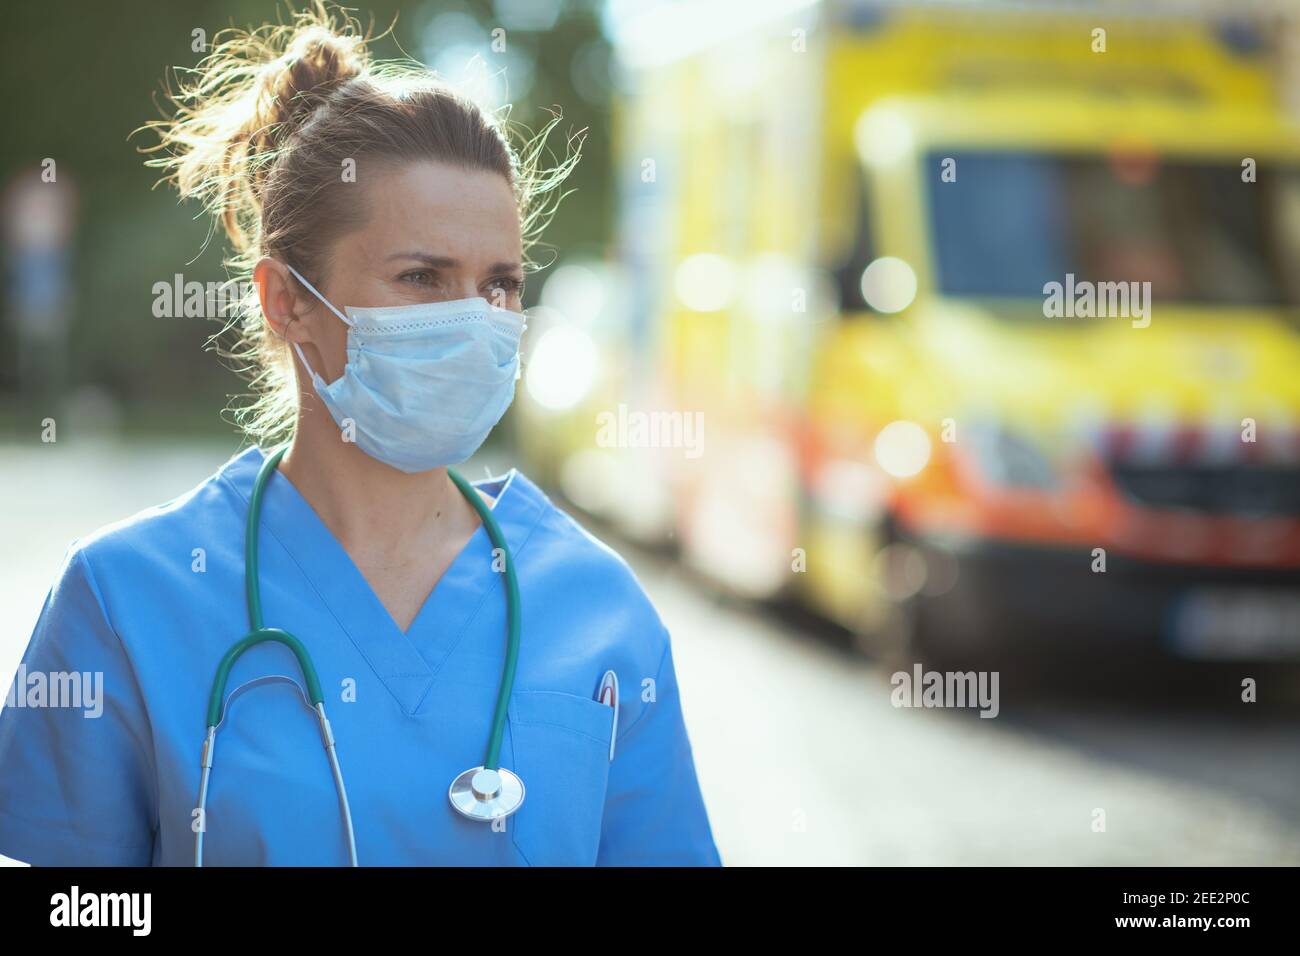 covid-19 pandemic. pensive modern medical doctor woman in uniform with stethoscope and medical mask looking into the distance outside near ambulance. Stock Photo